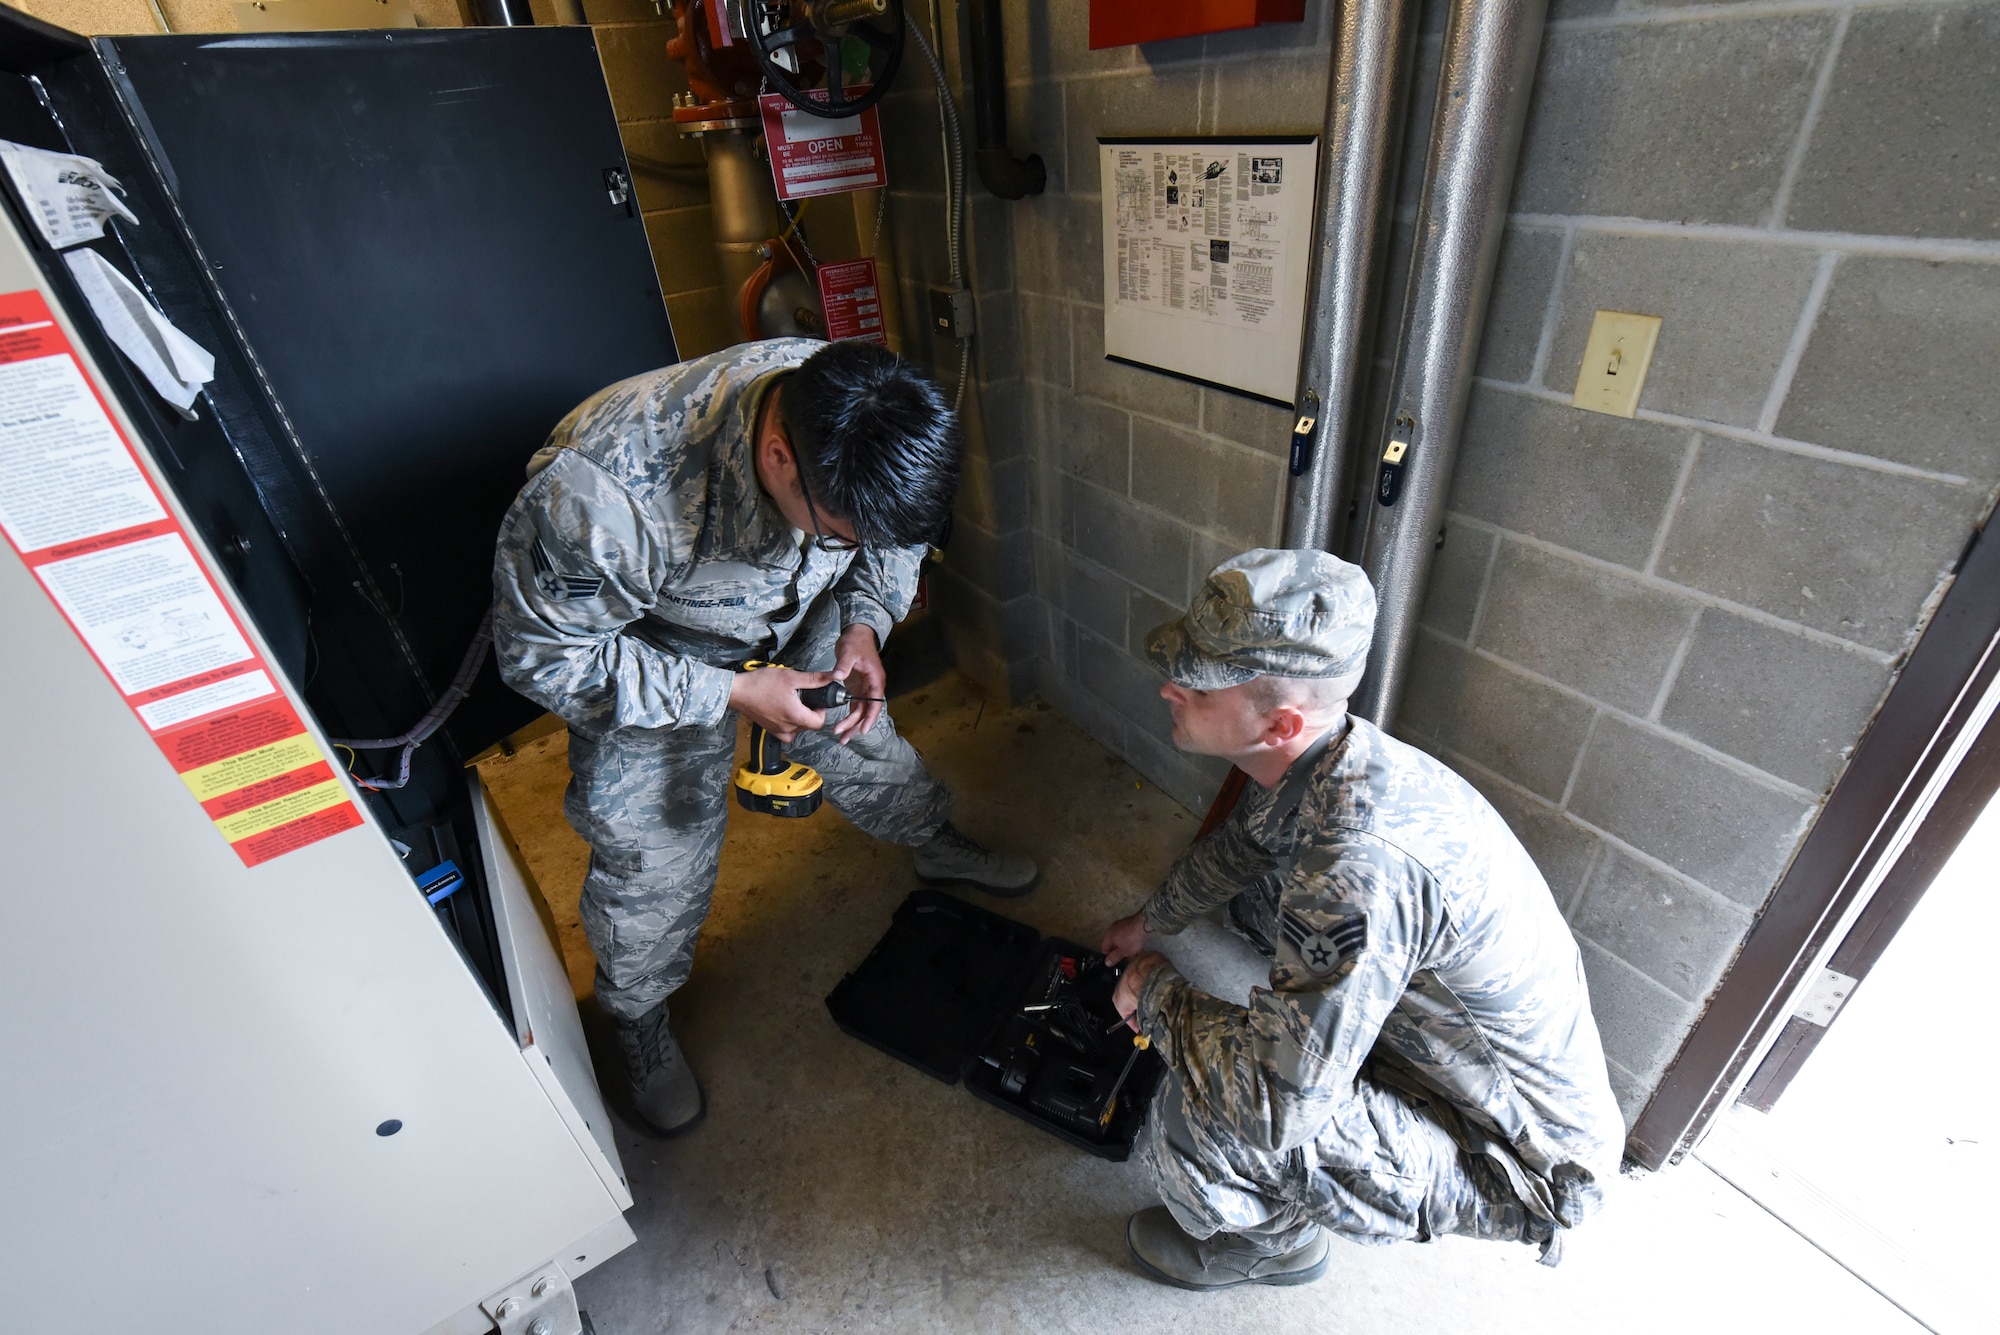 Senior Airman Kristian Martinez-felix, left, a 319th Civil Engineer Squadron heating, ventilation, air conditioning and refrigeration apprentice, and Senior Airman Tristan Miles, a 319th HVAC-R journeyman, maintain the water boilers June 20, 2018, on Grand Forks Air Force Base, North Dakota. Martinez-felix said that they typically work on the water boilers in the summertime to ensure they are prepared for the winter months. (U.S. Air Force photo by Airman 1st Class Melody Wolff)